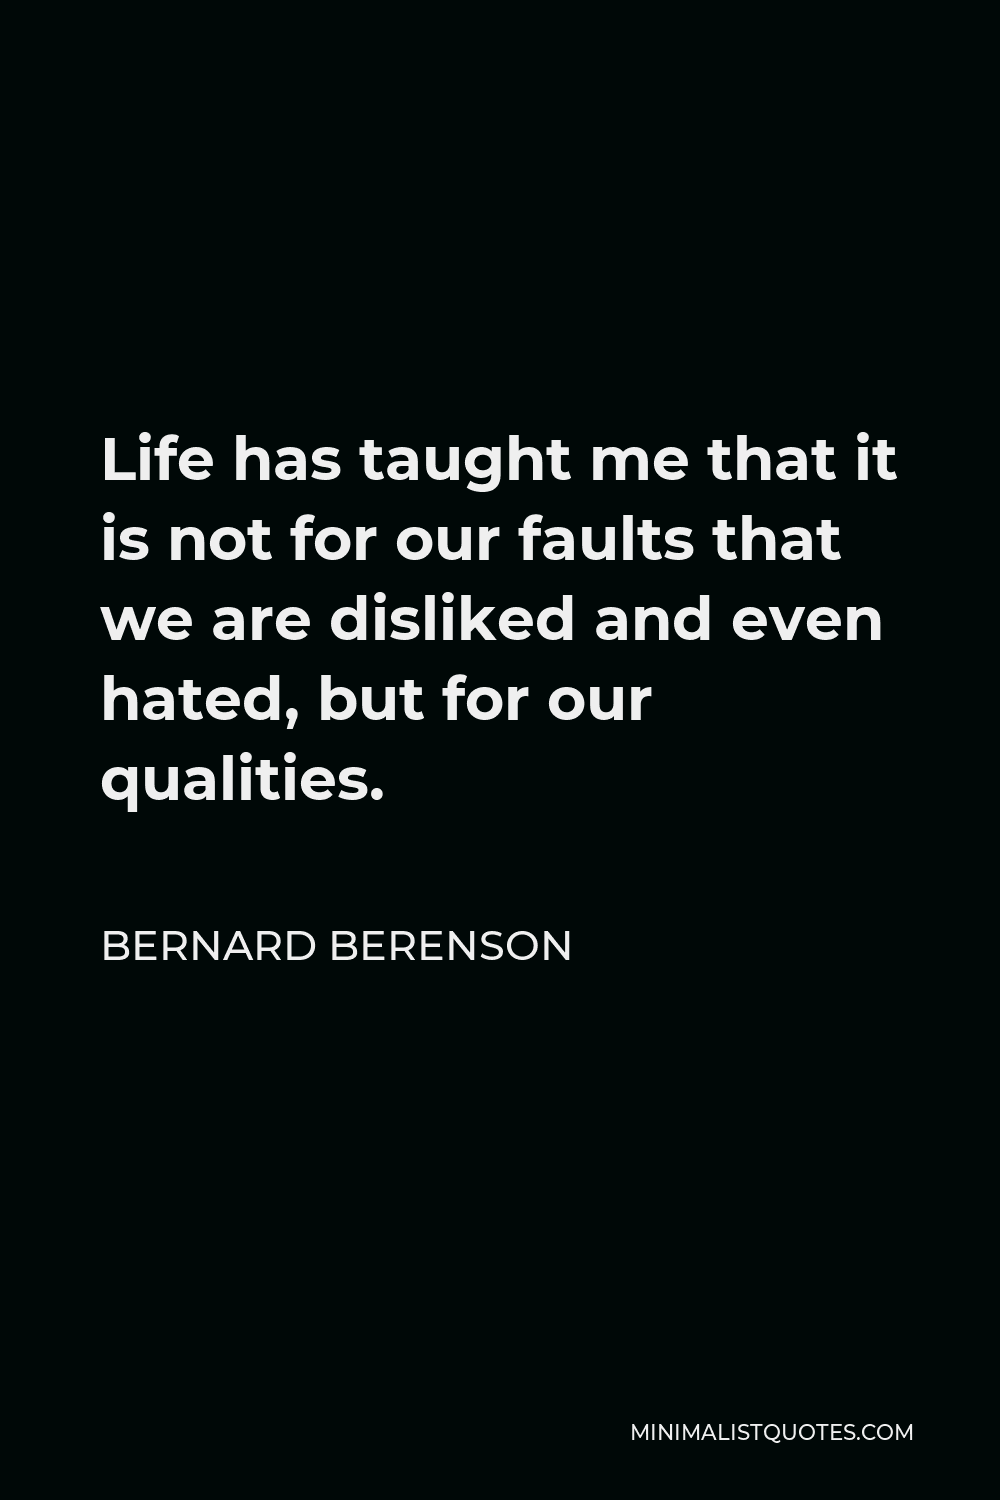 Bernard Berenson Quote - Life has taught me that it is not for our faults that we are disliked and even hated, but for our qualities.